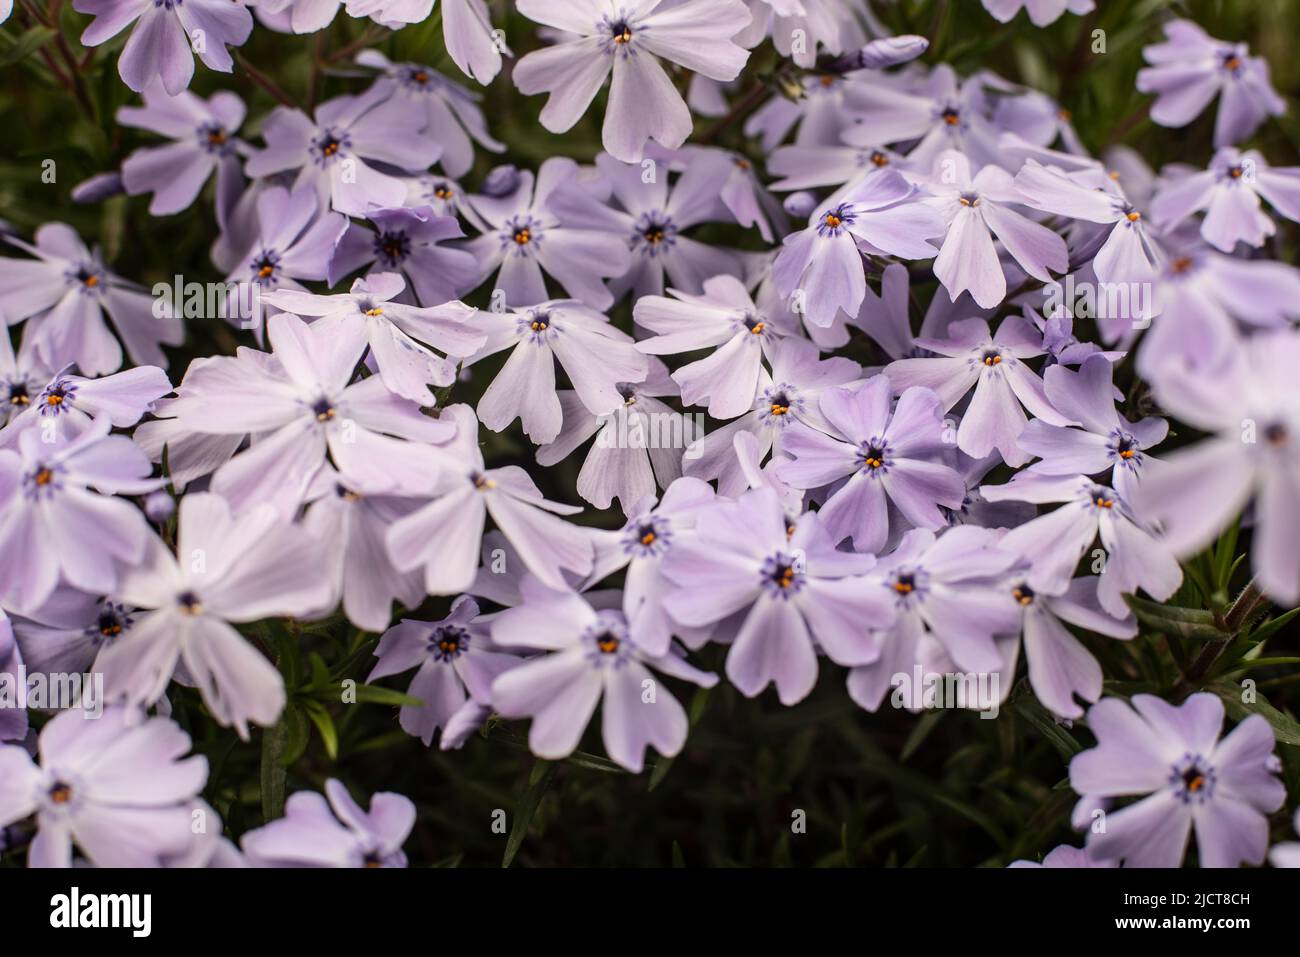 close-up of the pale purple flowers of the ground cover plant phlox subulata or moss phlox Stock Photo